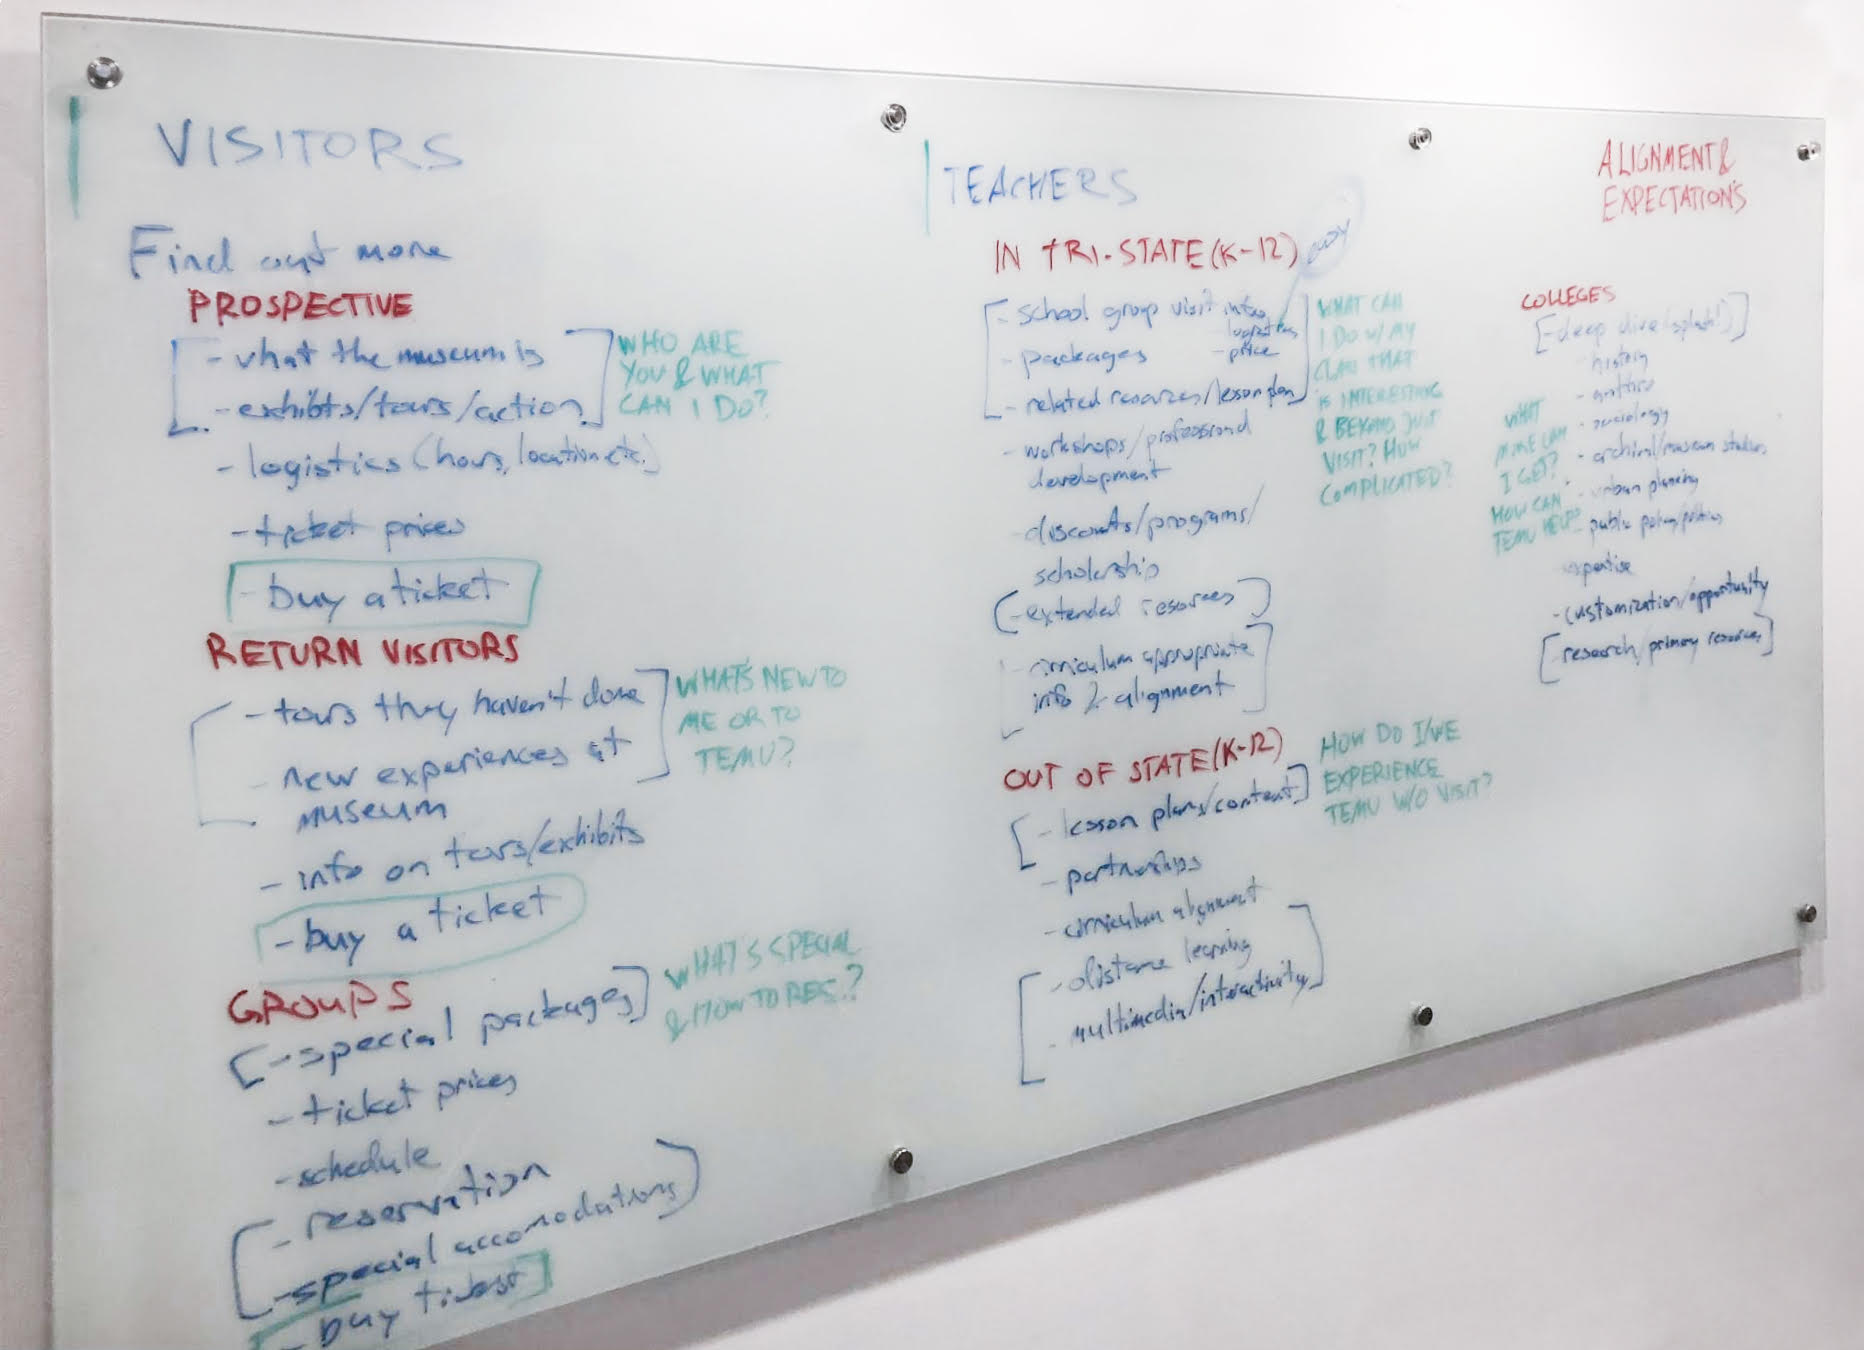 Whiteboard showing various audience segments along with their interests and goals.